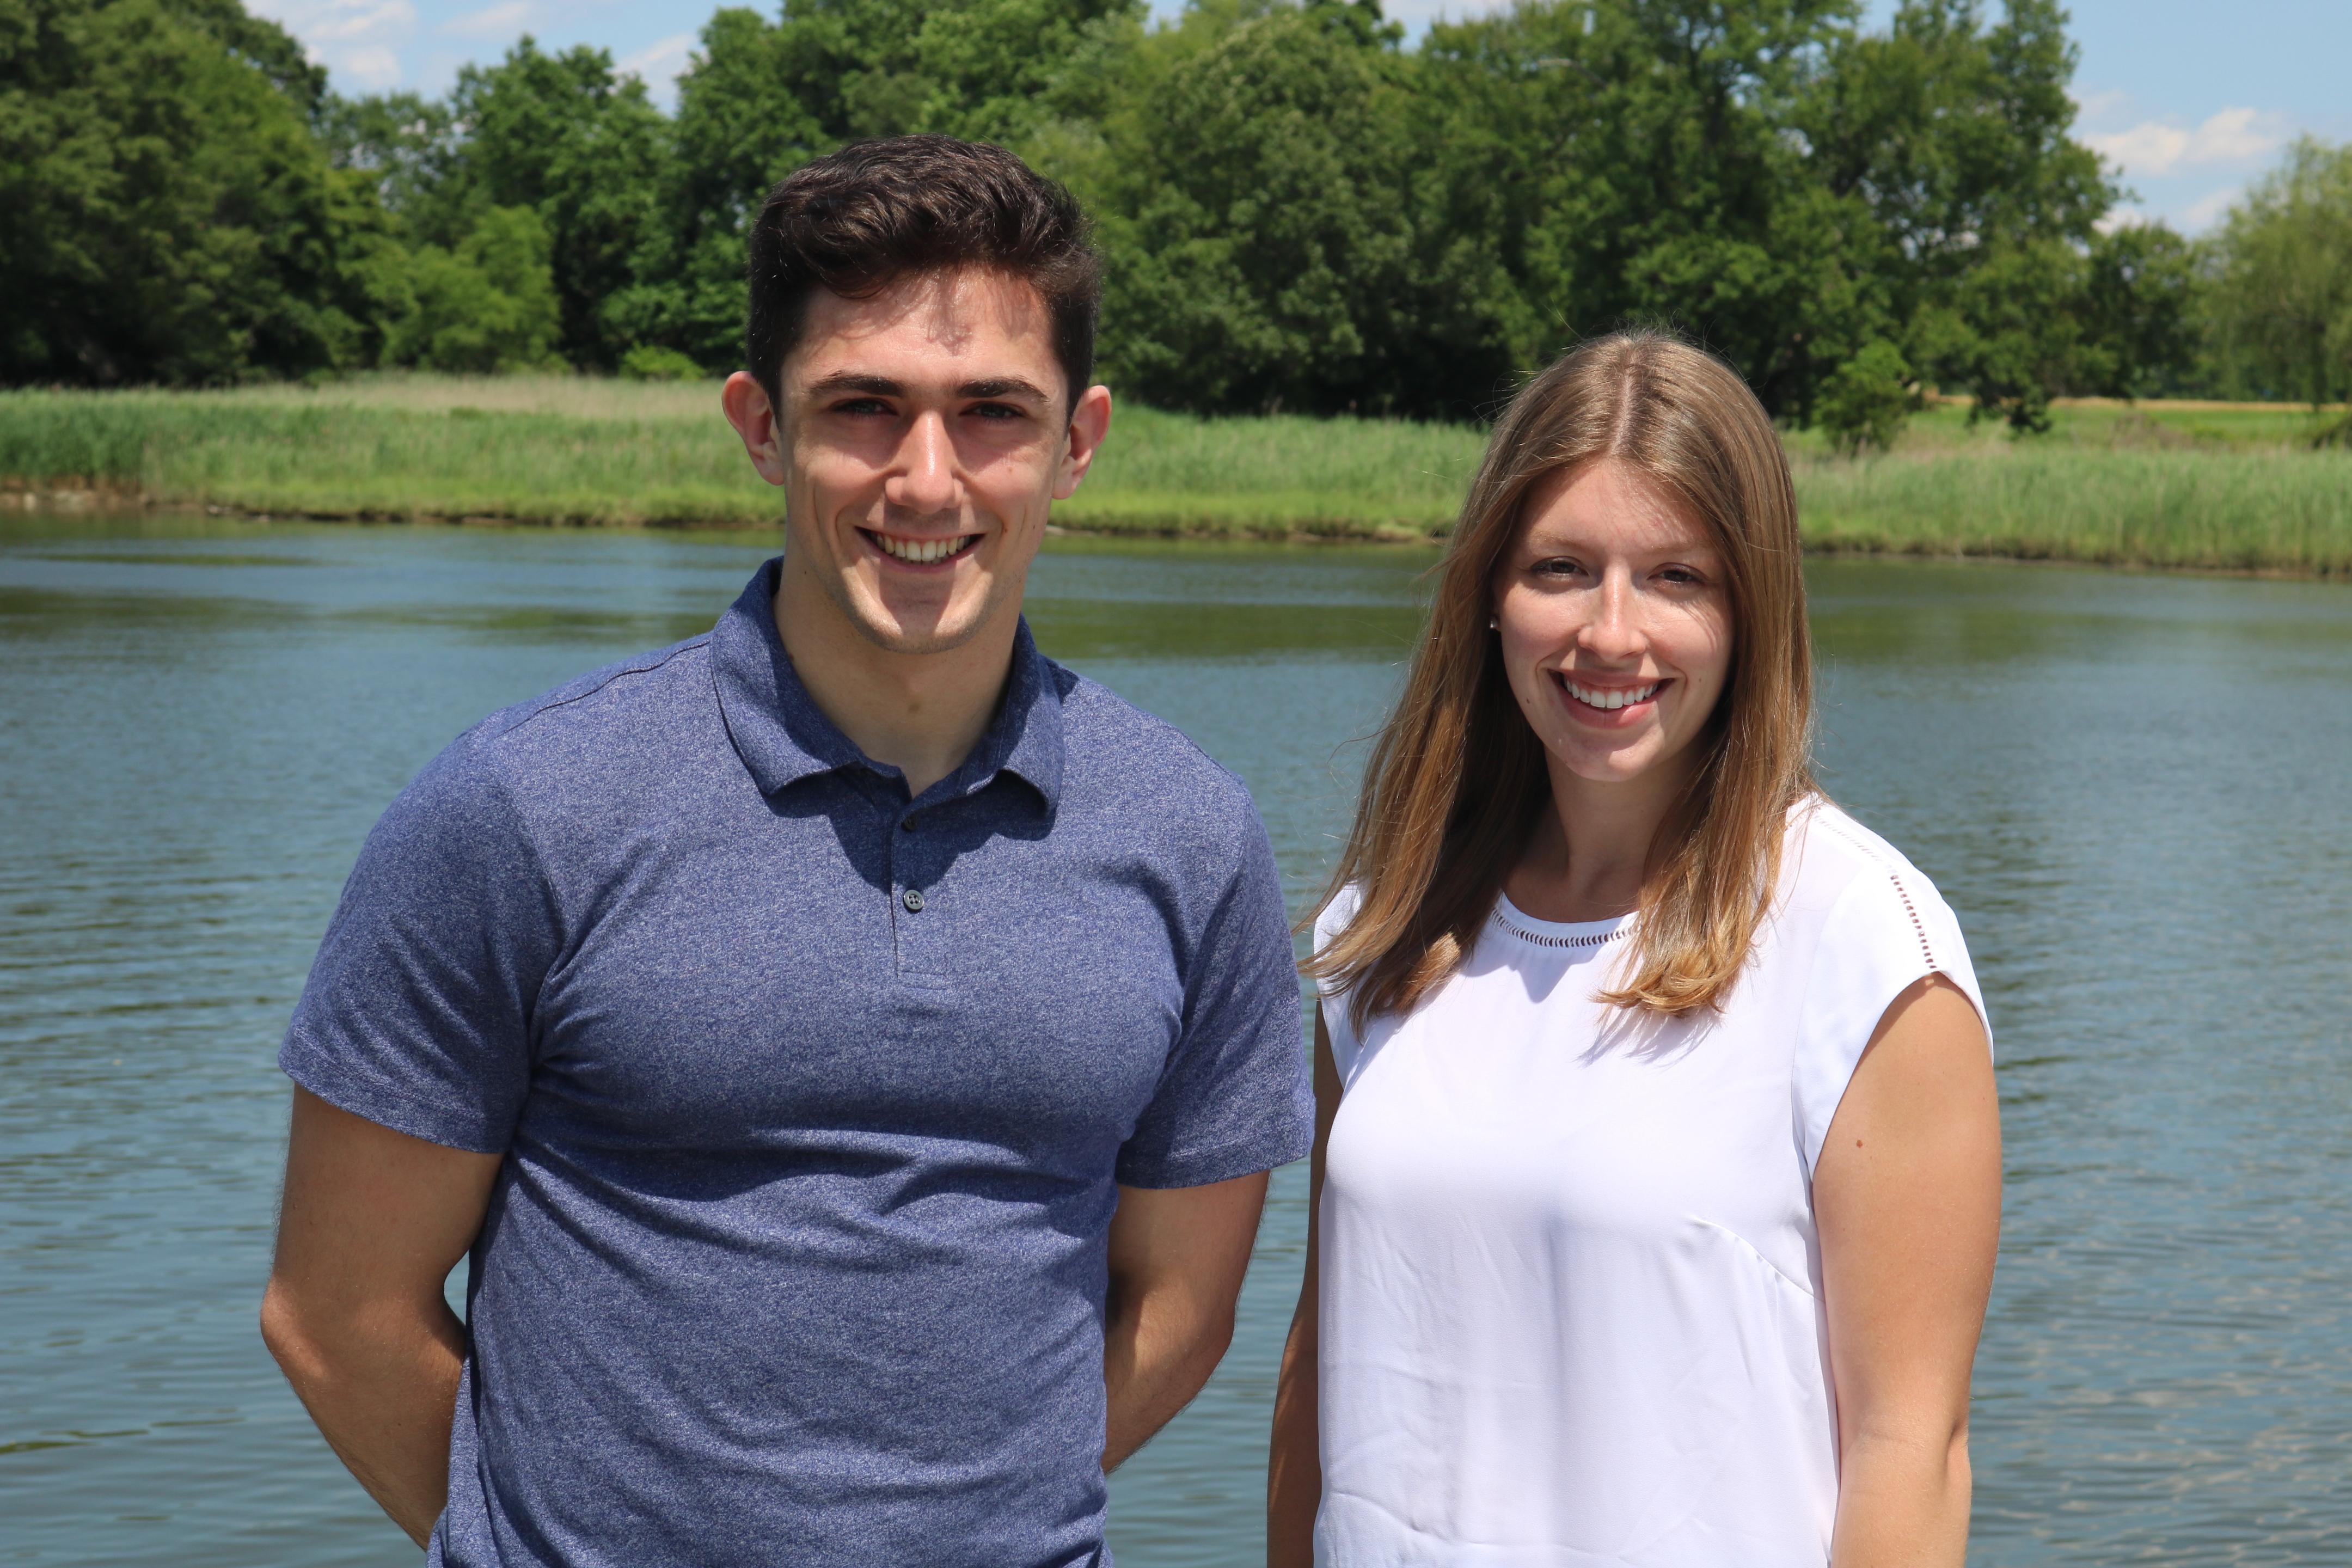 A photo of our 2019 interns, Michael Marinelli and Victoria Long